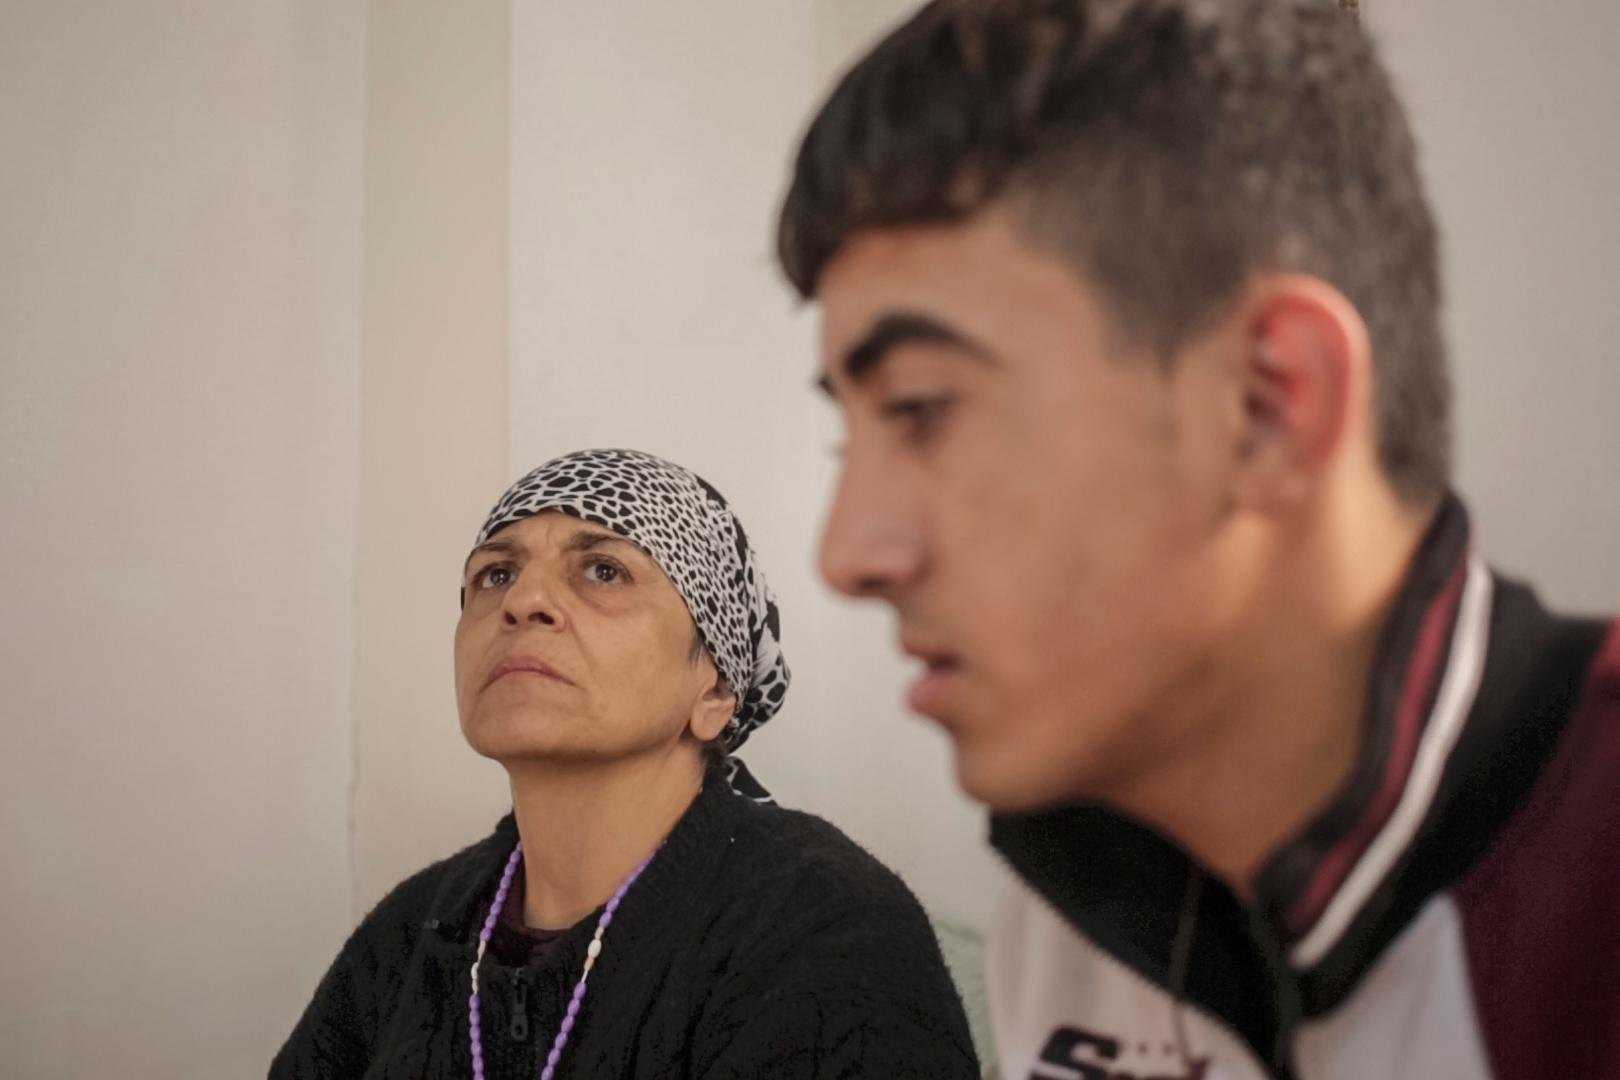 Jandar Nasi, a 54-year-old Christian Iraqi who fled ISIS-held Mosul with her son.